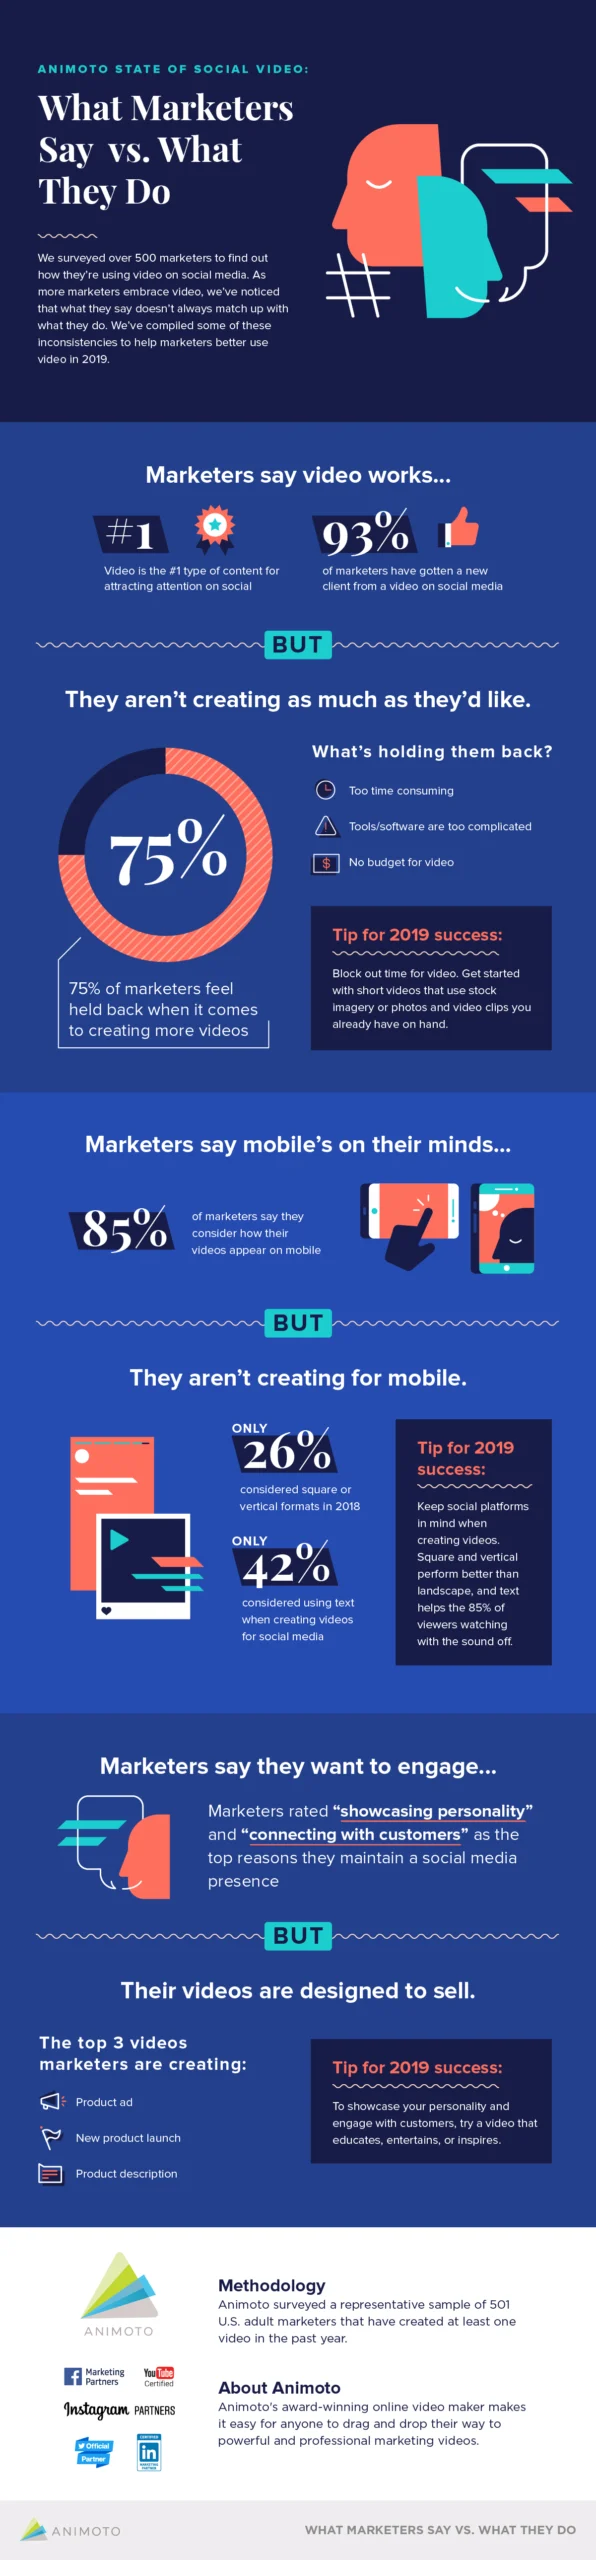 What Marketers Say VS. What They Do [InfoGraphic]